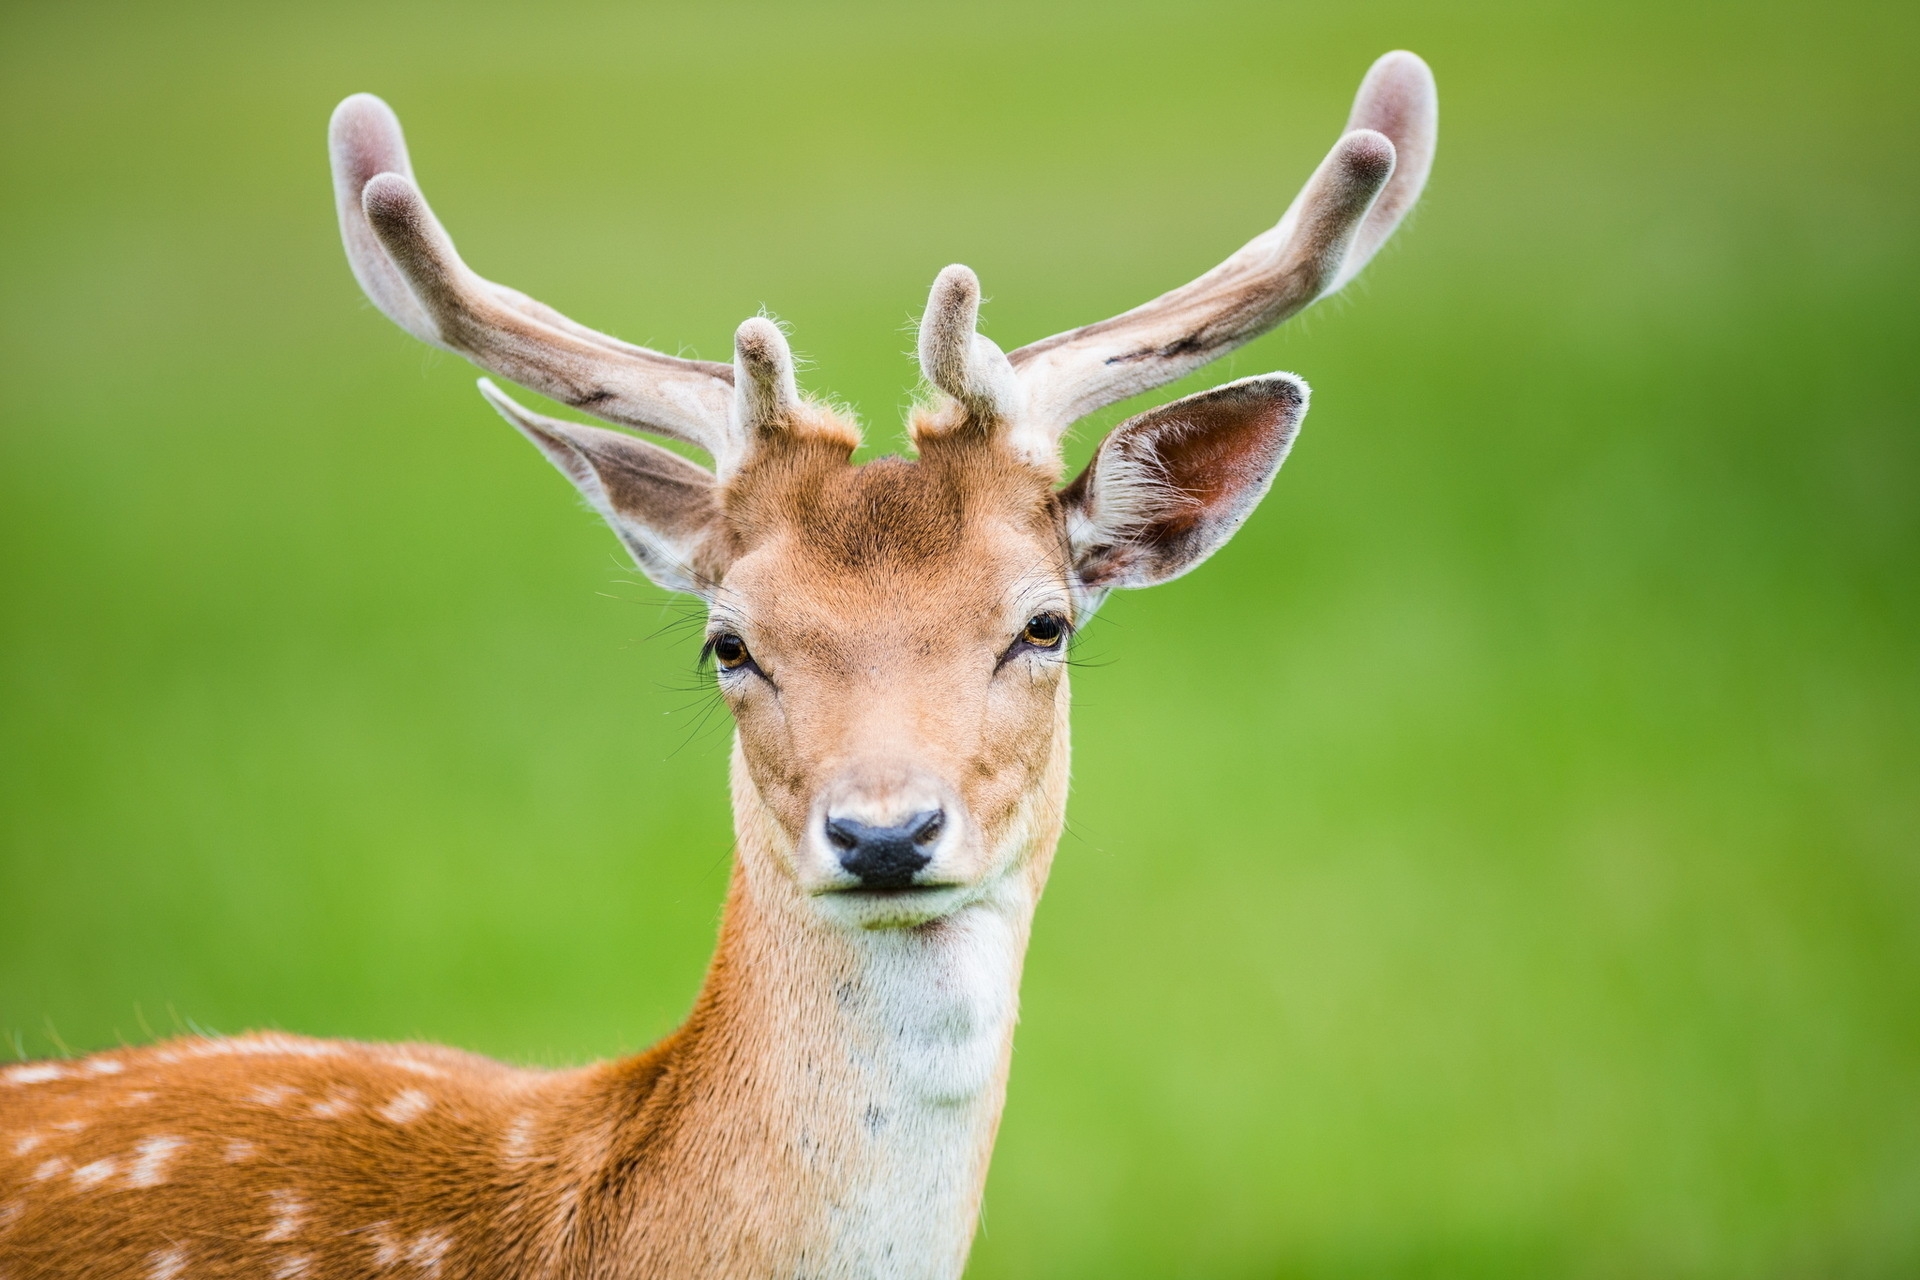 spotted, animals, spotty, deer, horns Full HD